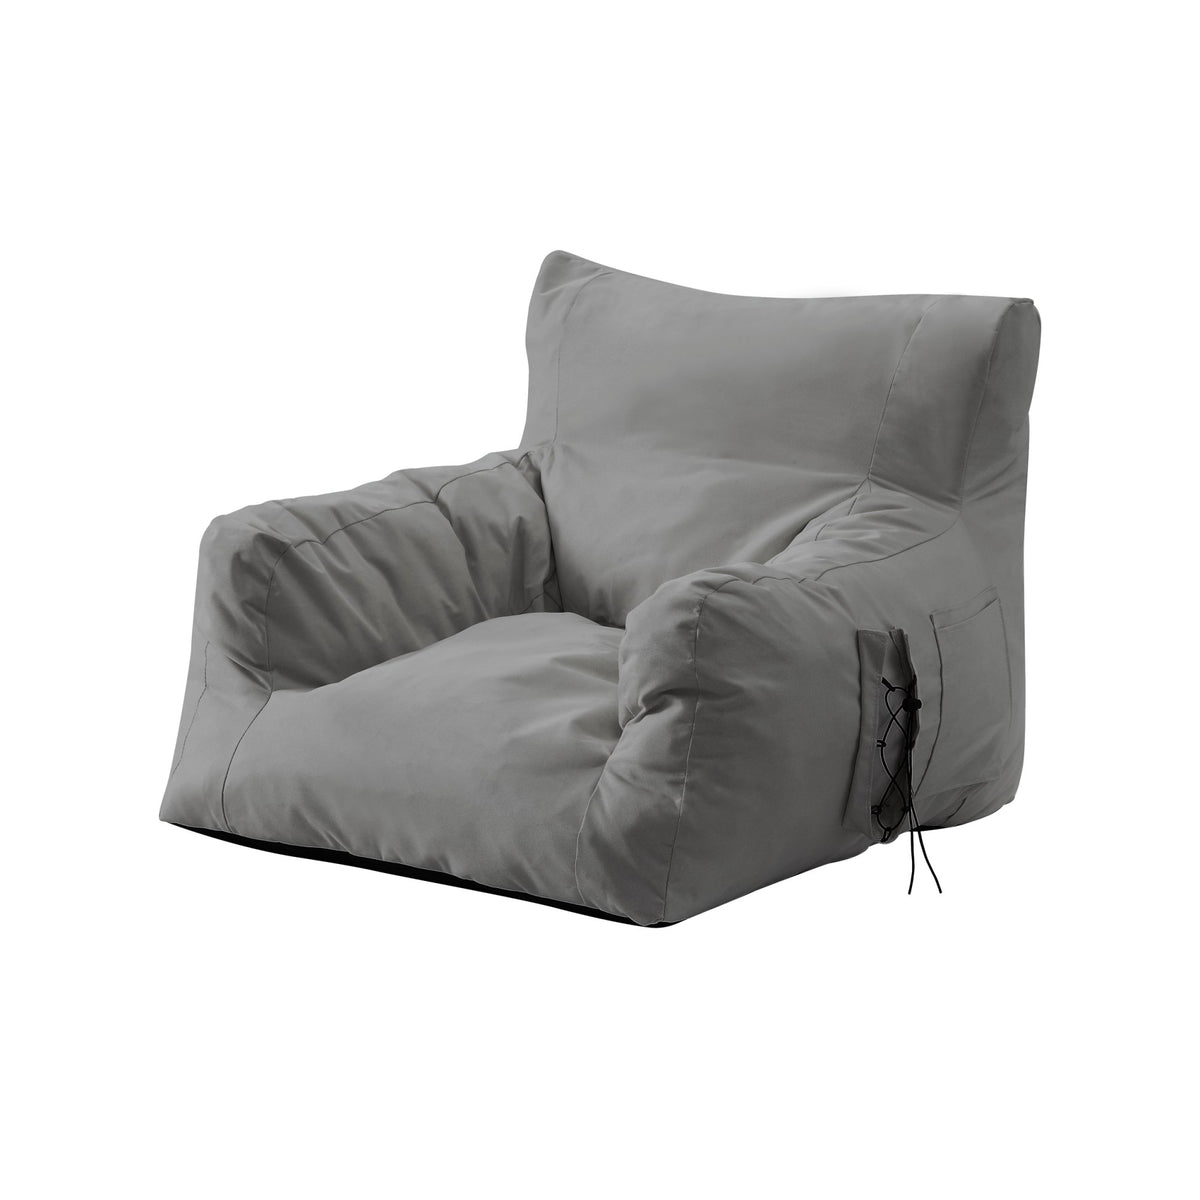 Bean Bags Lounge Chairs, Beanbag Beds Lazy Seat Zac